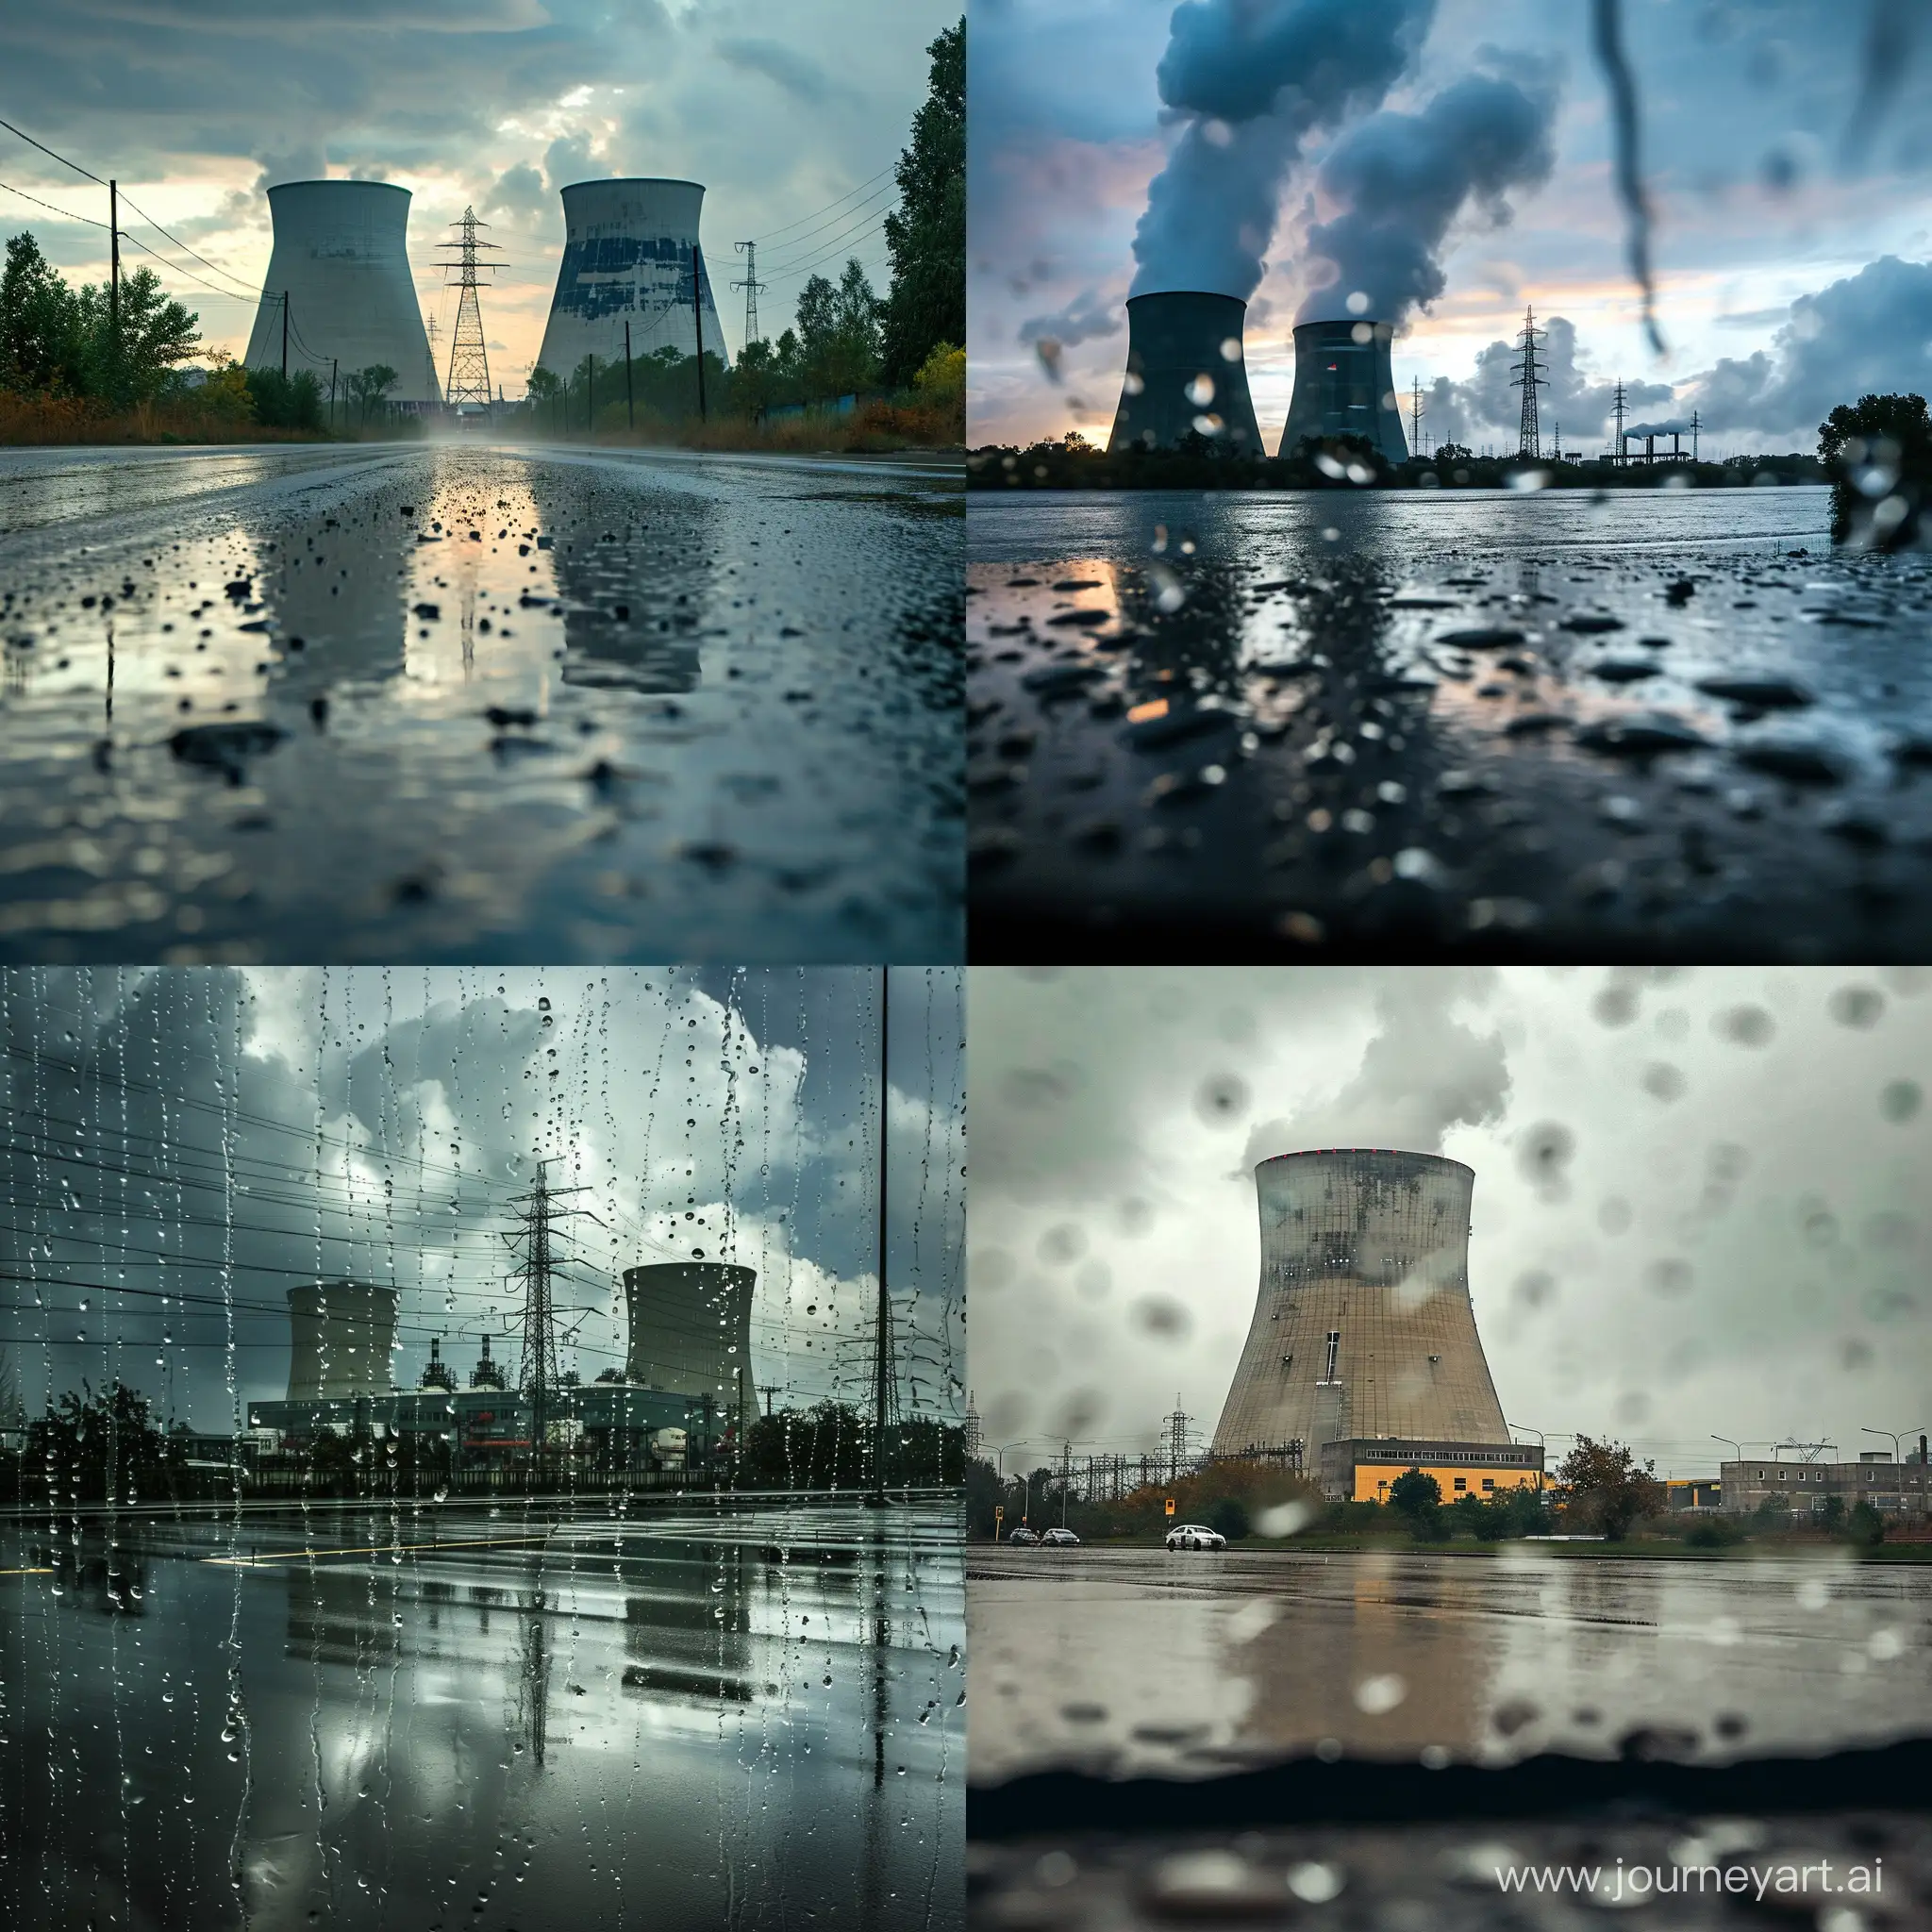 RainExposed-Nuclear-Power-Plant-Industrial-Elegance-in-Adversity